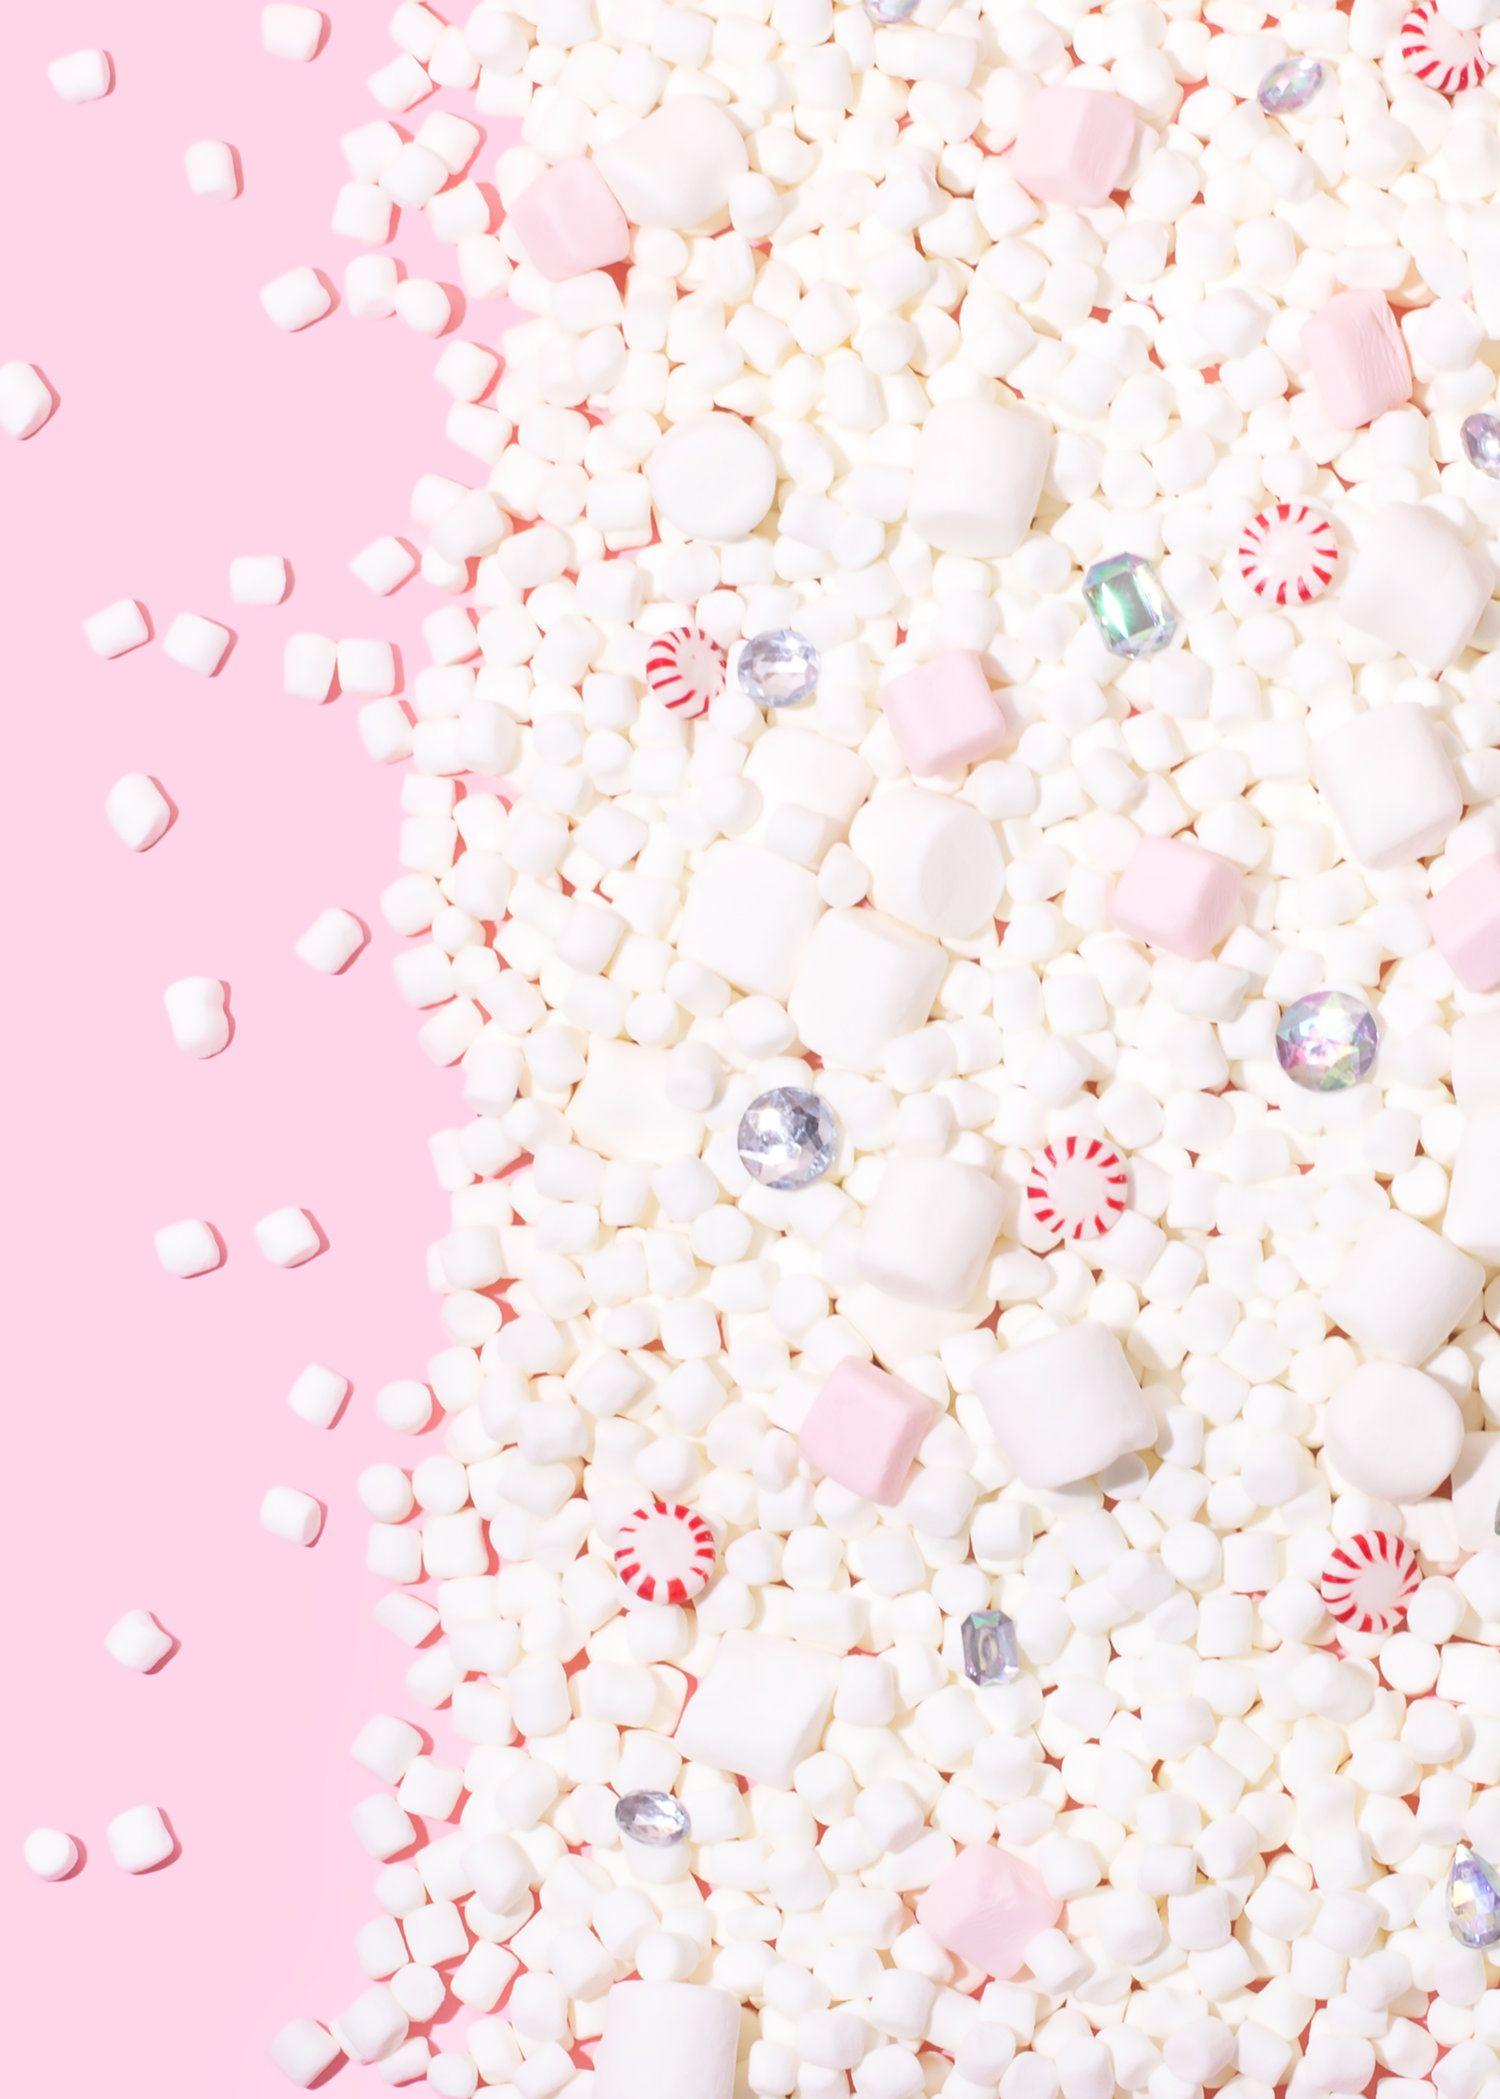 Marshmallow Phone Wallpapers - Top Free Marshmallow Phone Backgrounds ...